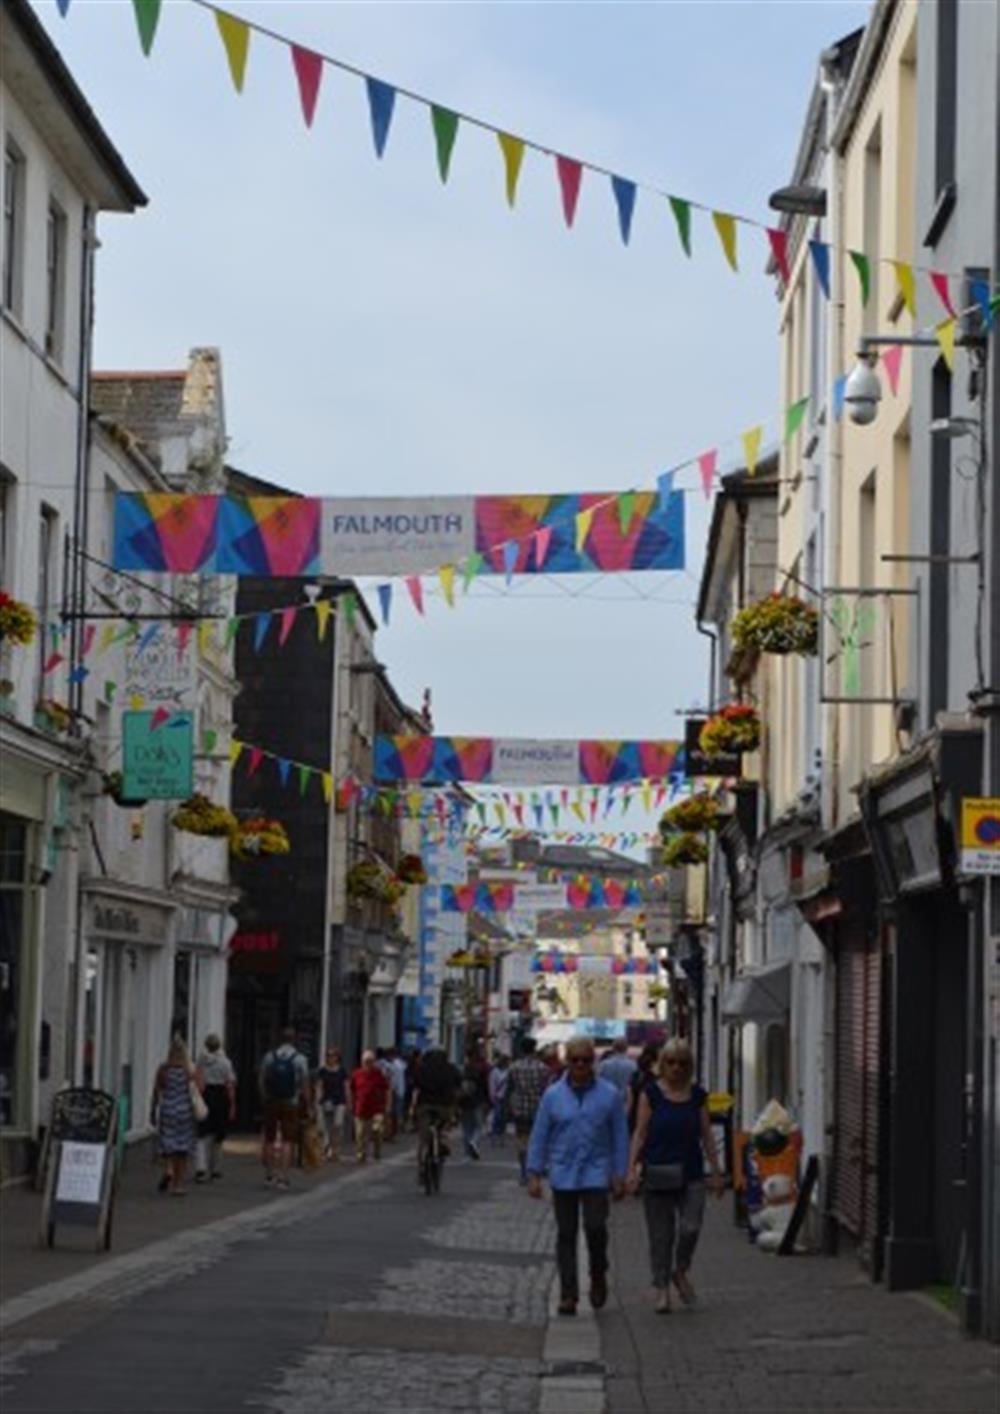 Falmouth town has an array of shops, plus a range of restaurants, cafes and art galleries at Portscatho in Helford Passage